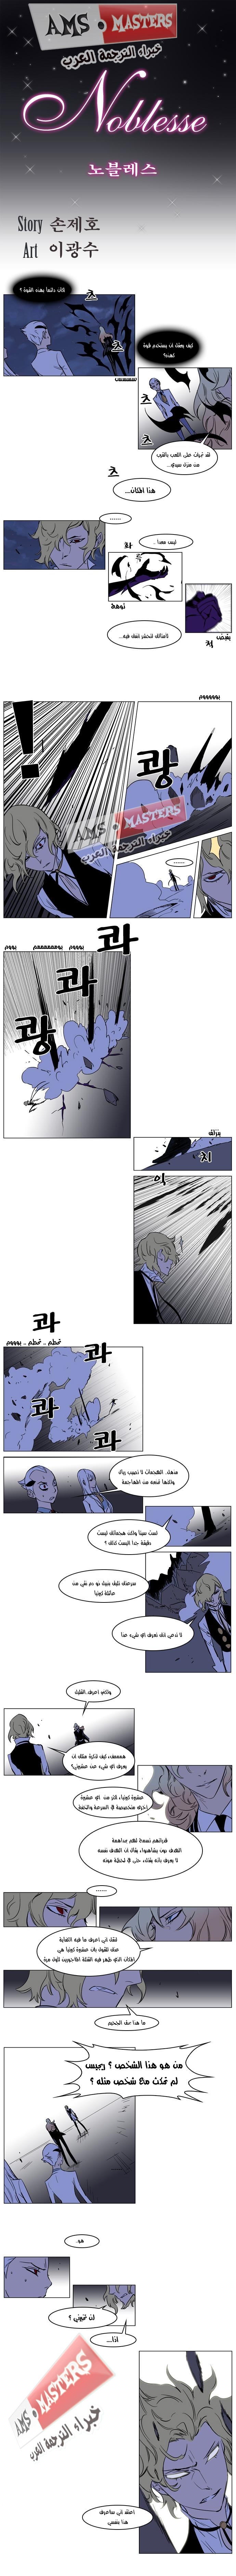 Noblesse: Chapter 169 - Page 1